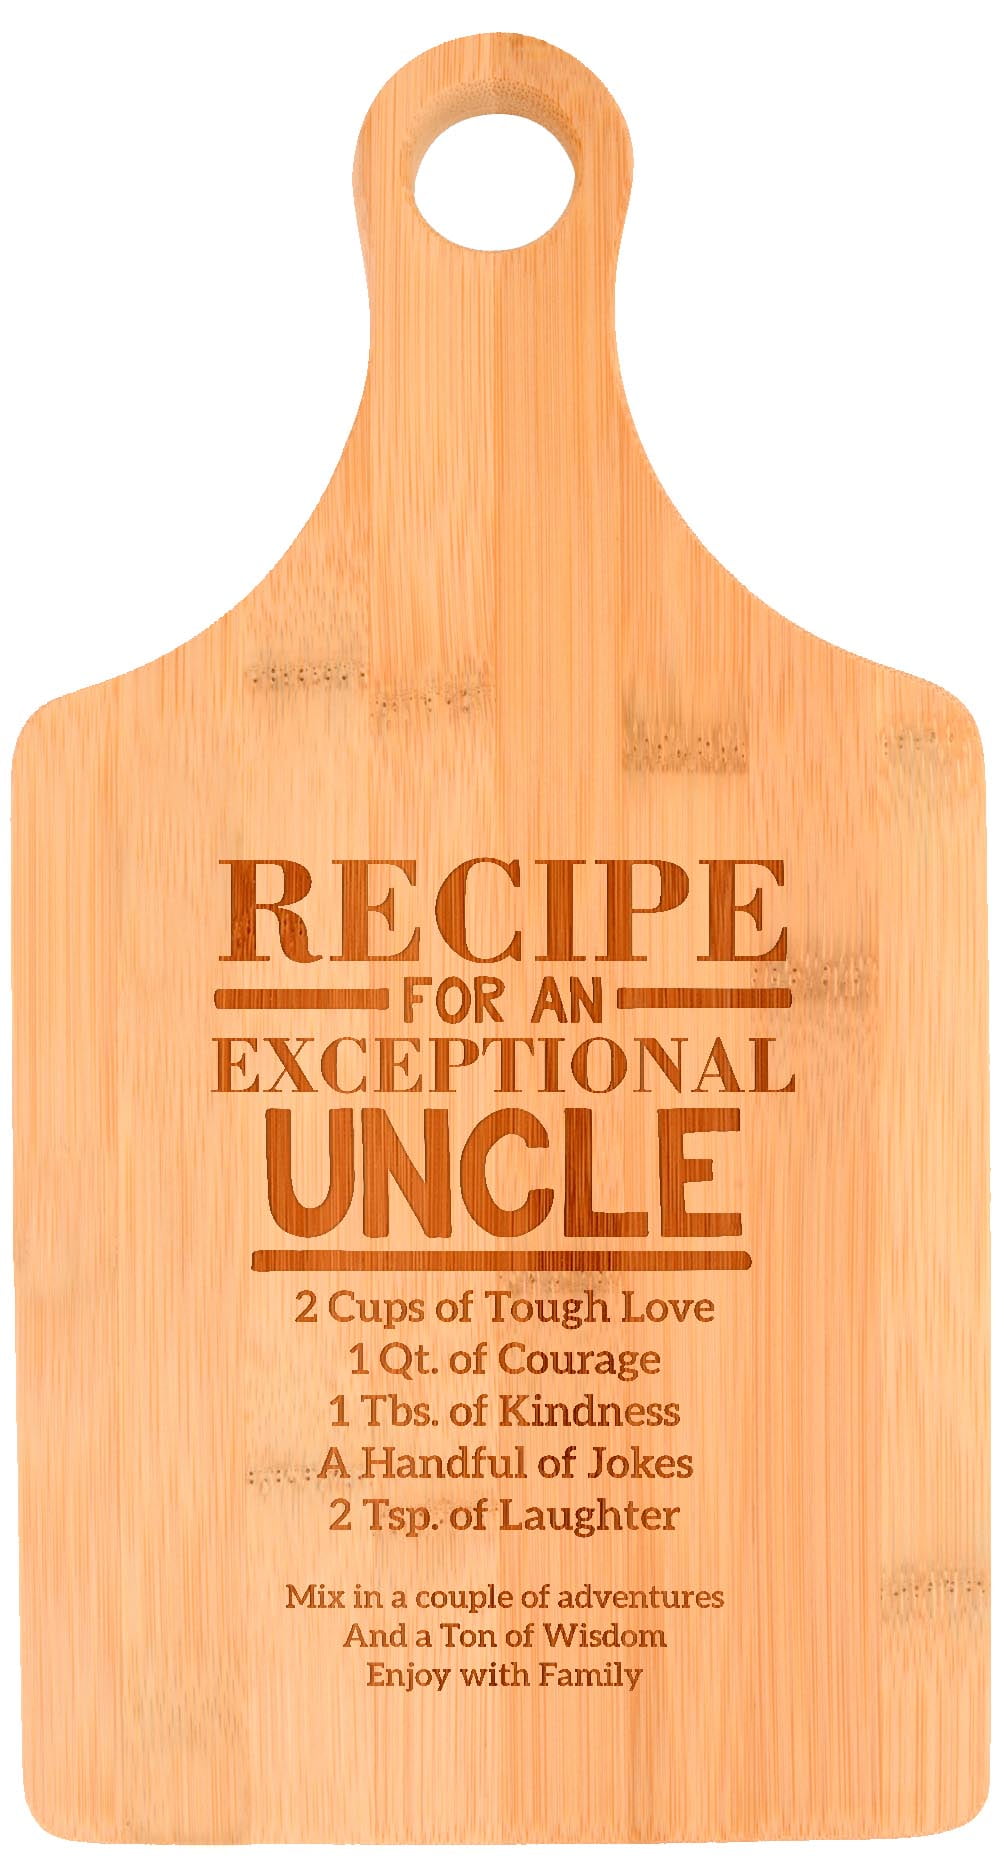 Personalized Couples Names Two-Toned Bamboo Cutting Board with Handle 9.75 x 13.5